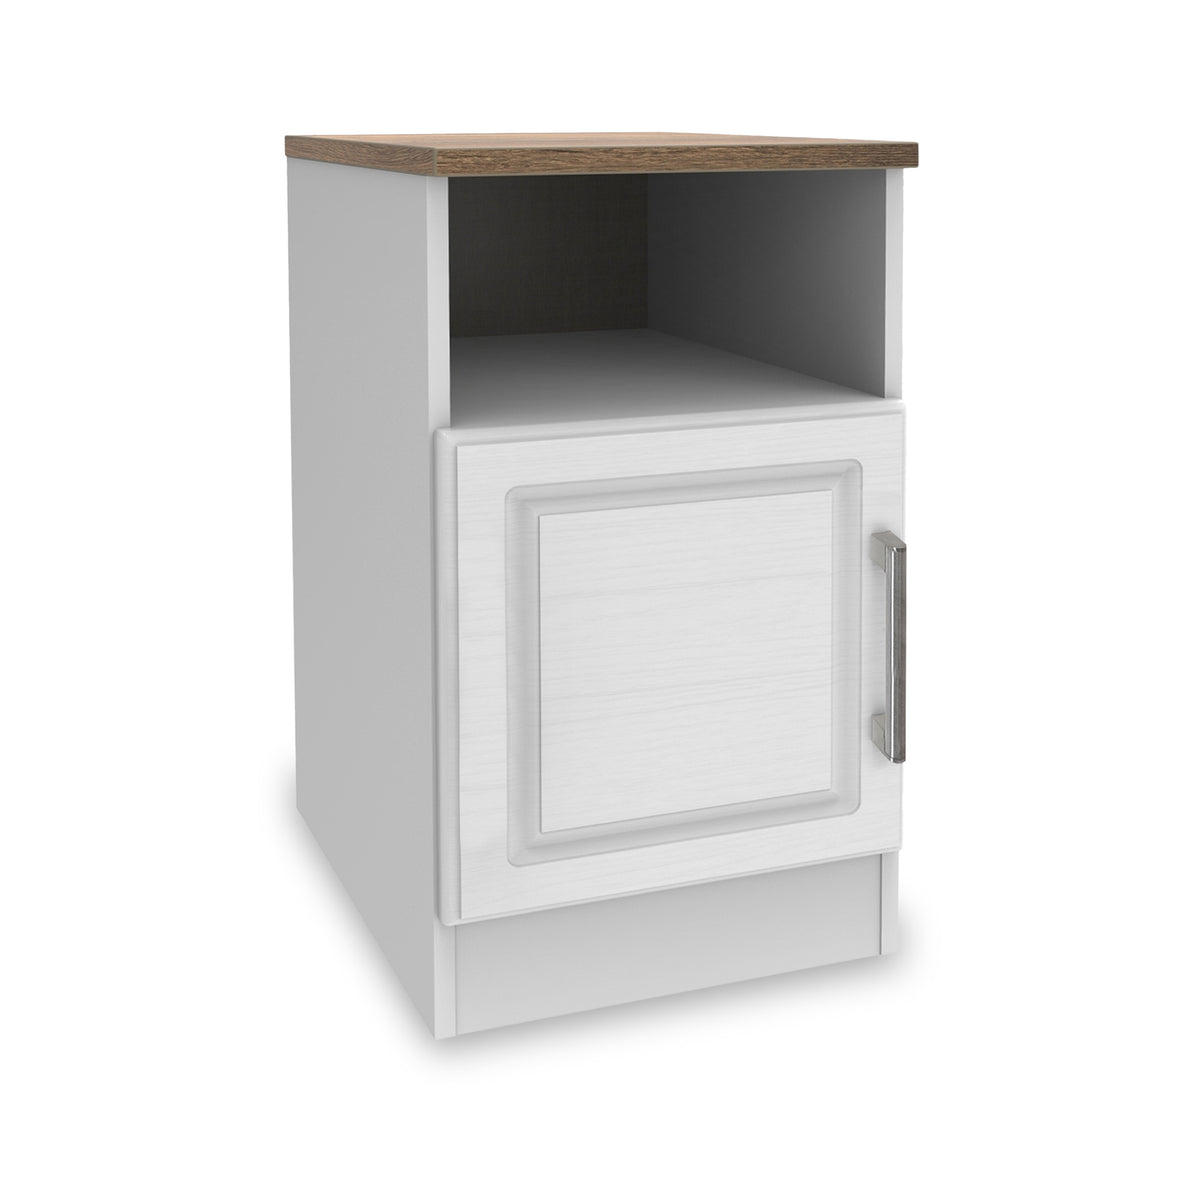 Talland White 1 Door Cabinet from Roseland Furniture